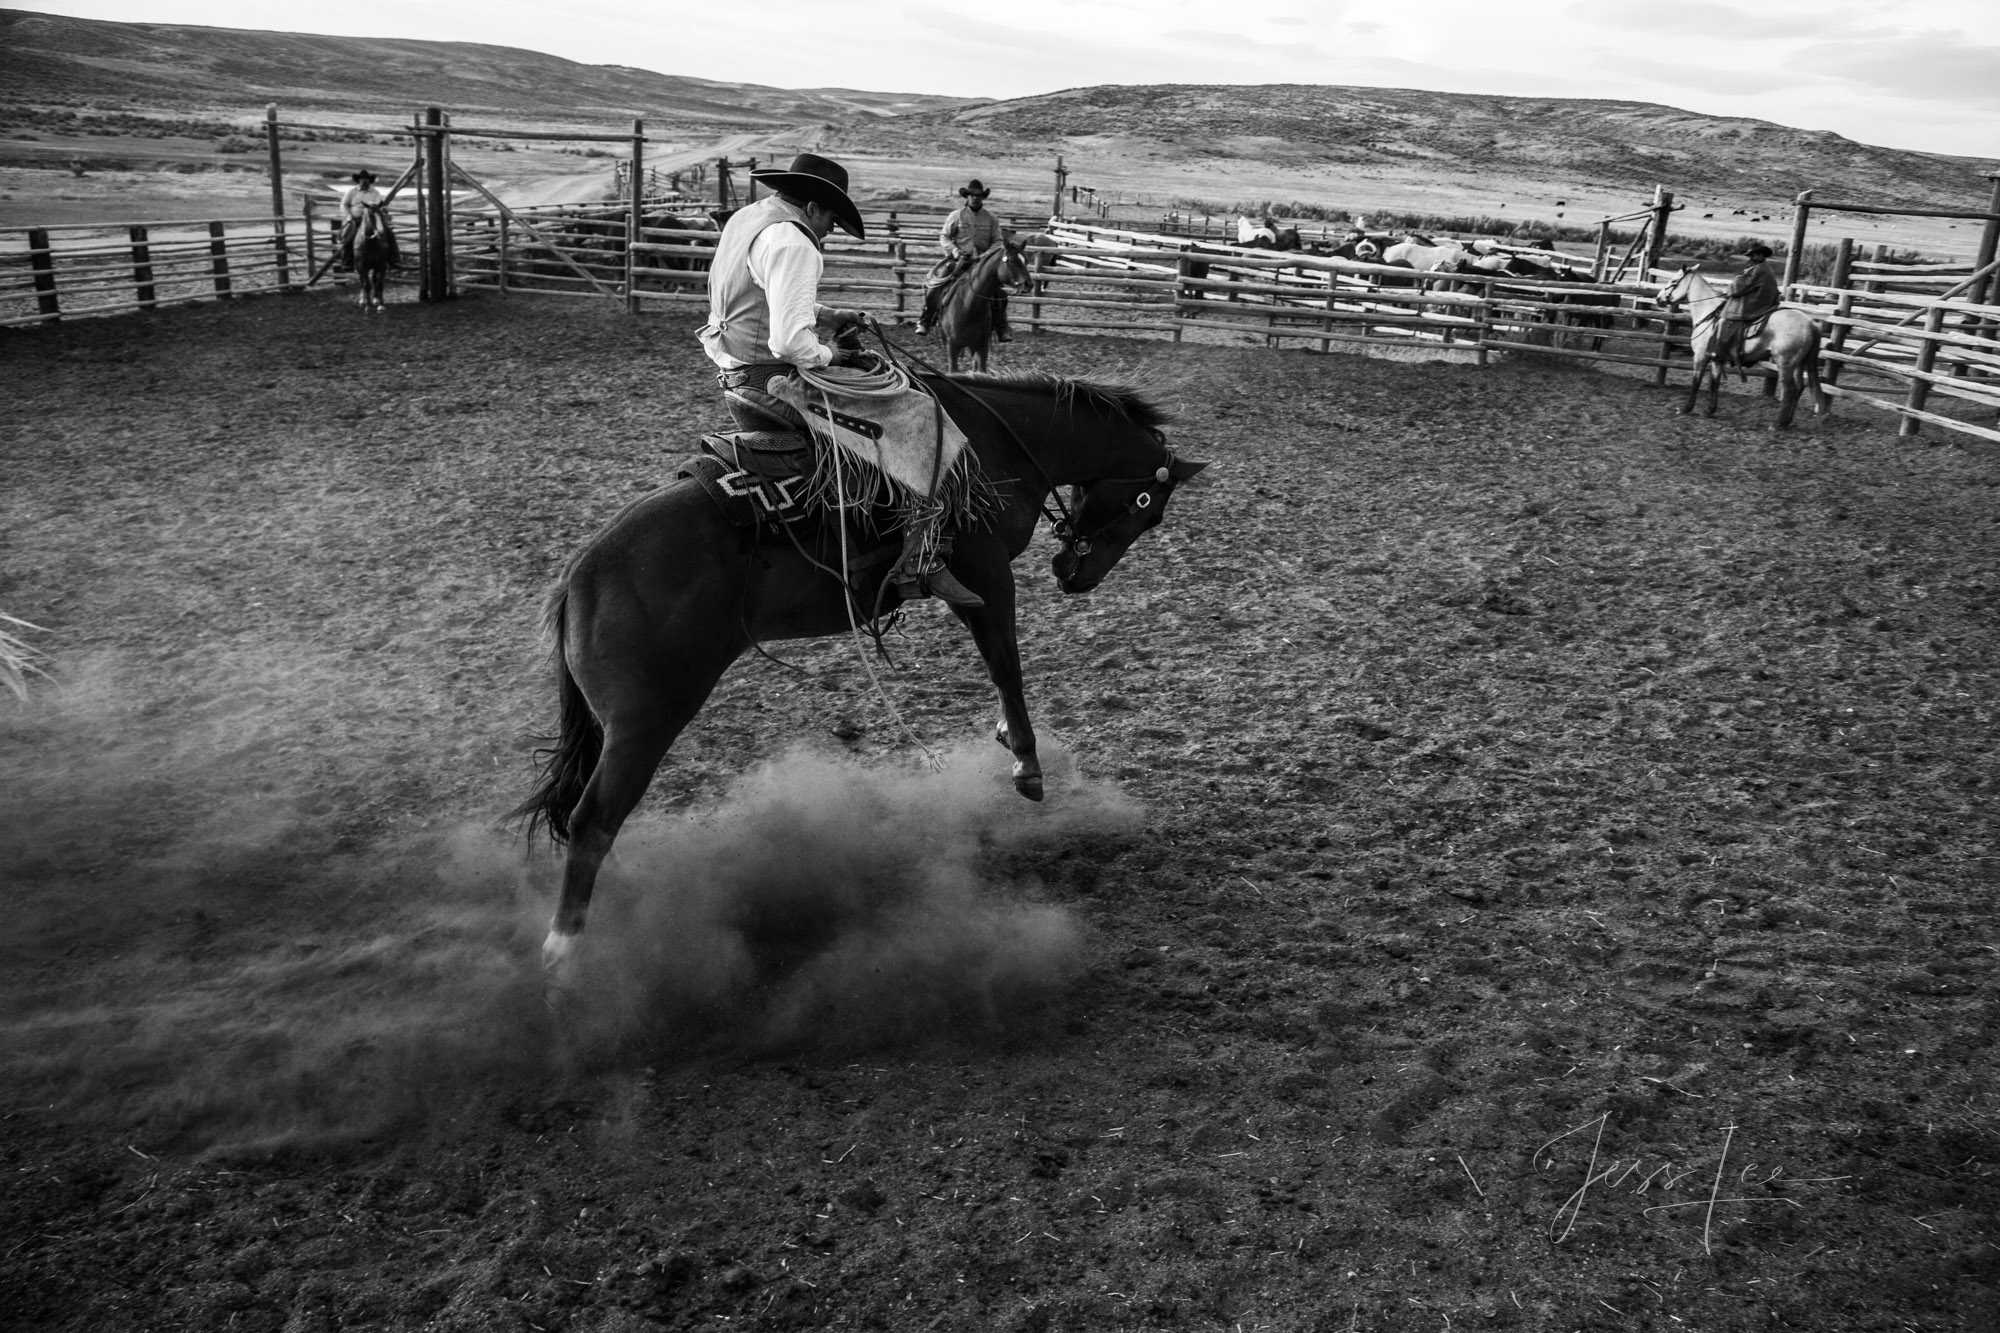 Fine Art Limited Edition Photo Prints of Cowboys, Horses, and life in the West. Get'n er Done. A Cowboy picture in black and...